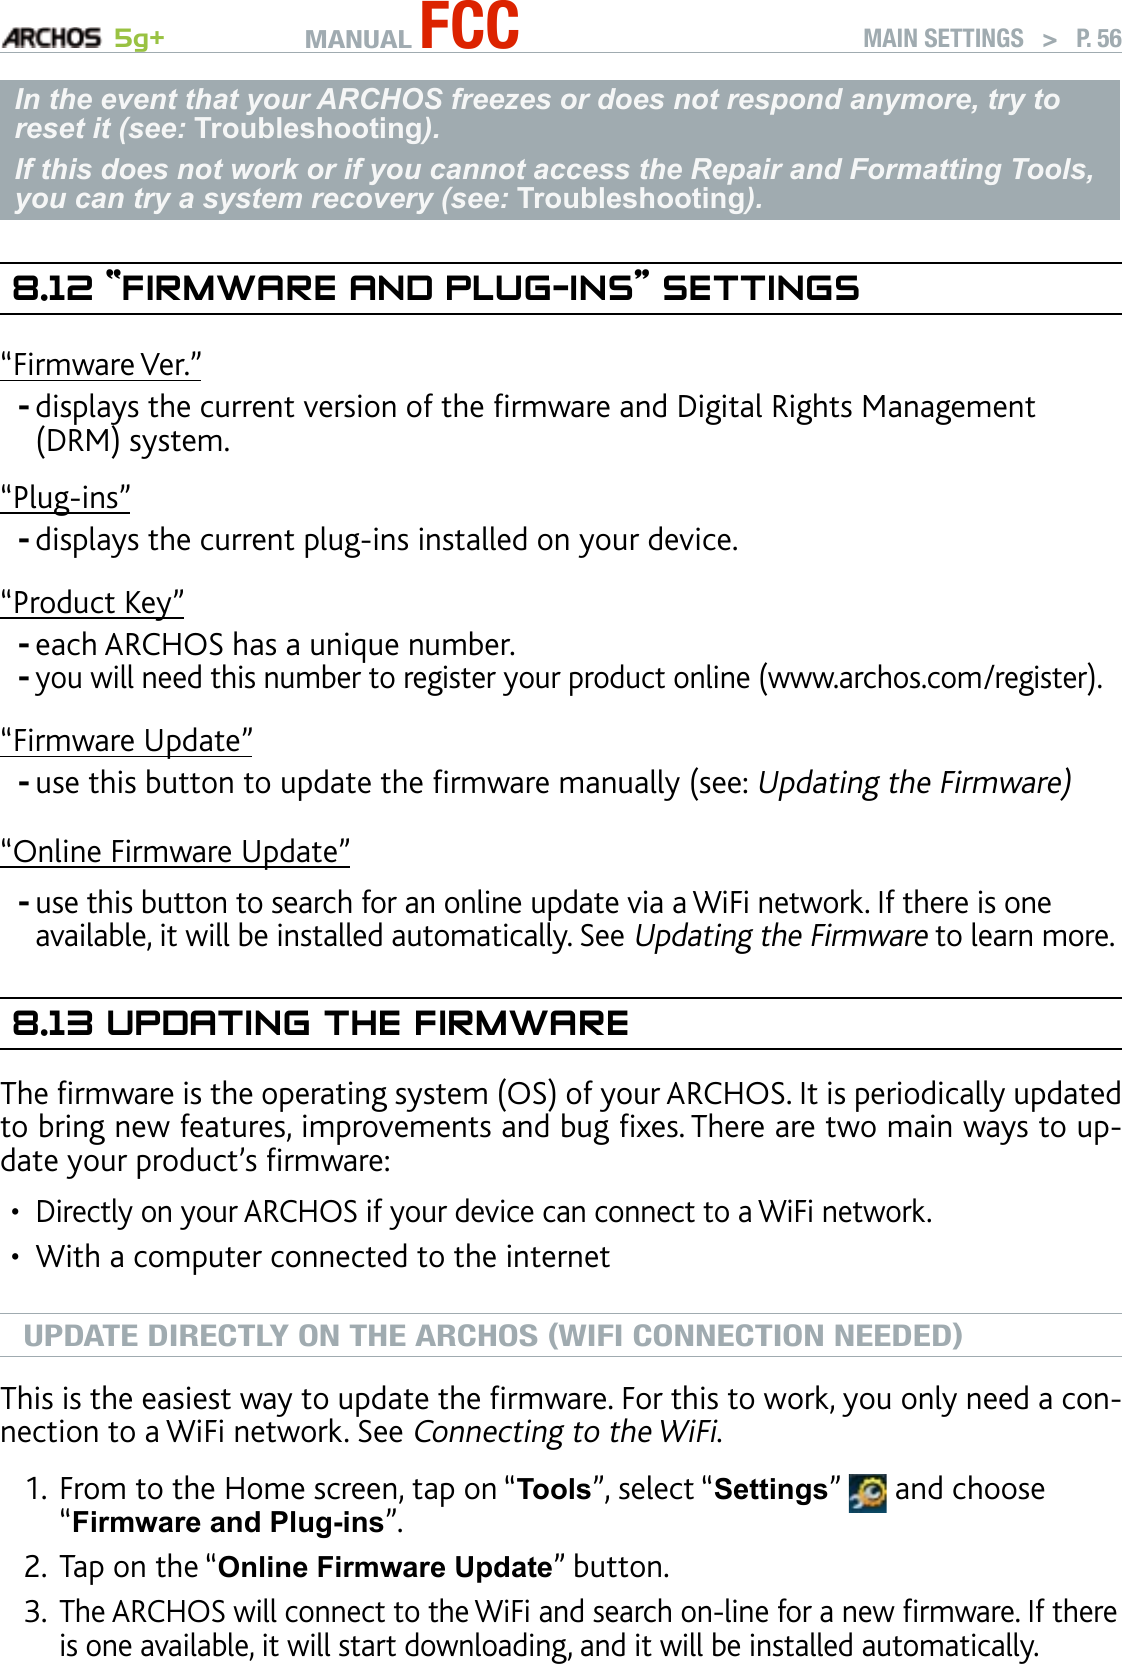 MANUAL FCC 5g+ MAIN SETTINGS   &gt;   P. 56In the event that your ARCHOS freezes or does not respond anymore, try to reset it (see: Troubleshooting). If this does not work or if you cannot access the Repair and Formatting Tools, you can try a system recovery (see: Troubleshooting).8.12 “fIrMware and Plug-Ins” seTTIngs“Firmware Ver.”displays the current version of the rmware and Digital Rights Management (DRM) system.“Plug-ins”displays the current plug-ins installed on your device.“Product Key”each ARCHOS has a unique number.you will need this number to register your product online (www.archos.com/register).“Firmware Update”use this button to update the rmware manually (see: Updating the Firmware)“Online Firmware Update”use this button to search for an online update via a WiFi network. If there is one available, it will be installed automatically. See Updating the Firmware to learn more.8.13 uPdaTIng The fIrMwareThe rmware is the operating system (OS) of your ARCHOS. It is periodically updated to bring new features, improvements and bug xes. There are two main ways to up-date your product’s rmware:Directly on your ARCHOS if your device can connect to a WiFi network.With a computer connected to the internetUPDATE DIRECTLY ON THE ARCHOS (WIFI CONNECTION NEEDED)This is the easiest way to update the rmware. For this to work, you only need a con-nection to a WiFi network. See Connecting to the WiFi.From to the Home screen, tap on “Tools”, select “Settings”   and choose “Firmware and Plug-ins”.Tap on the “Online Firmware Update” button. The ARCHOS will connect to the WiFi and search on-line for a new rmware. If there is one available, it will start downloading, and it will be installed automatically. ------••1.2.3.